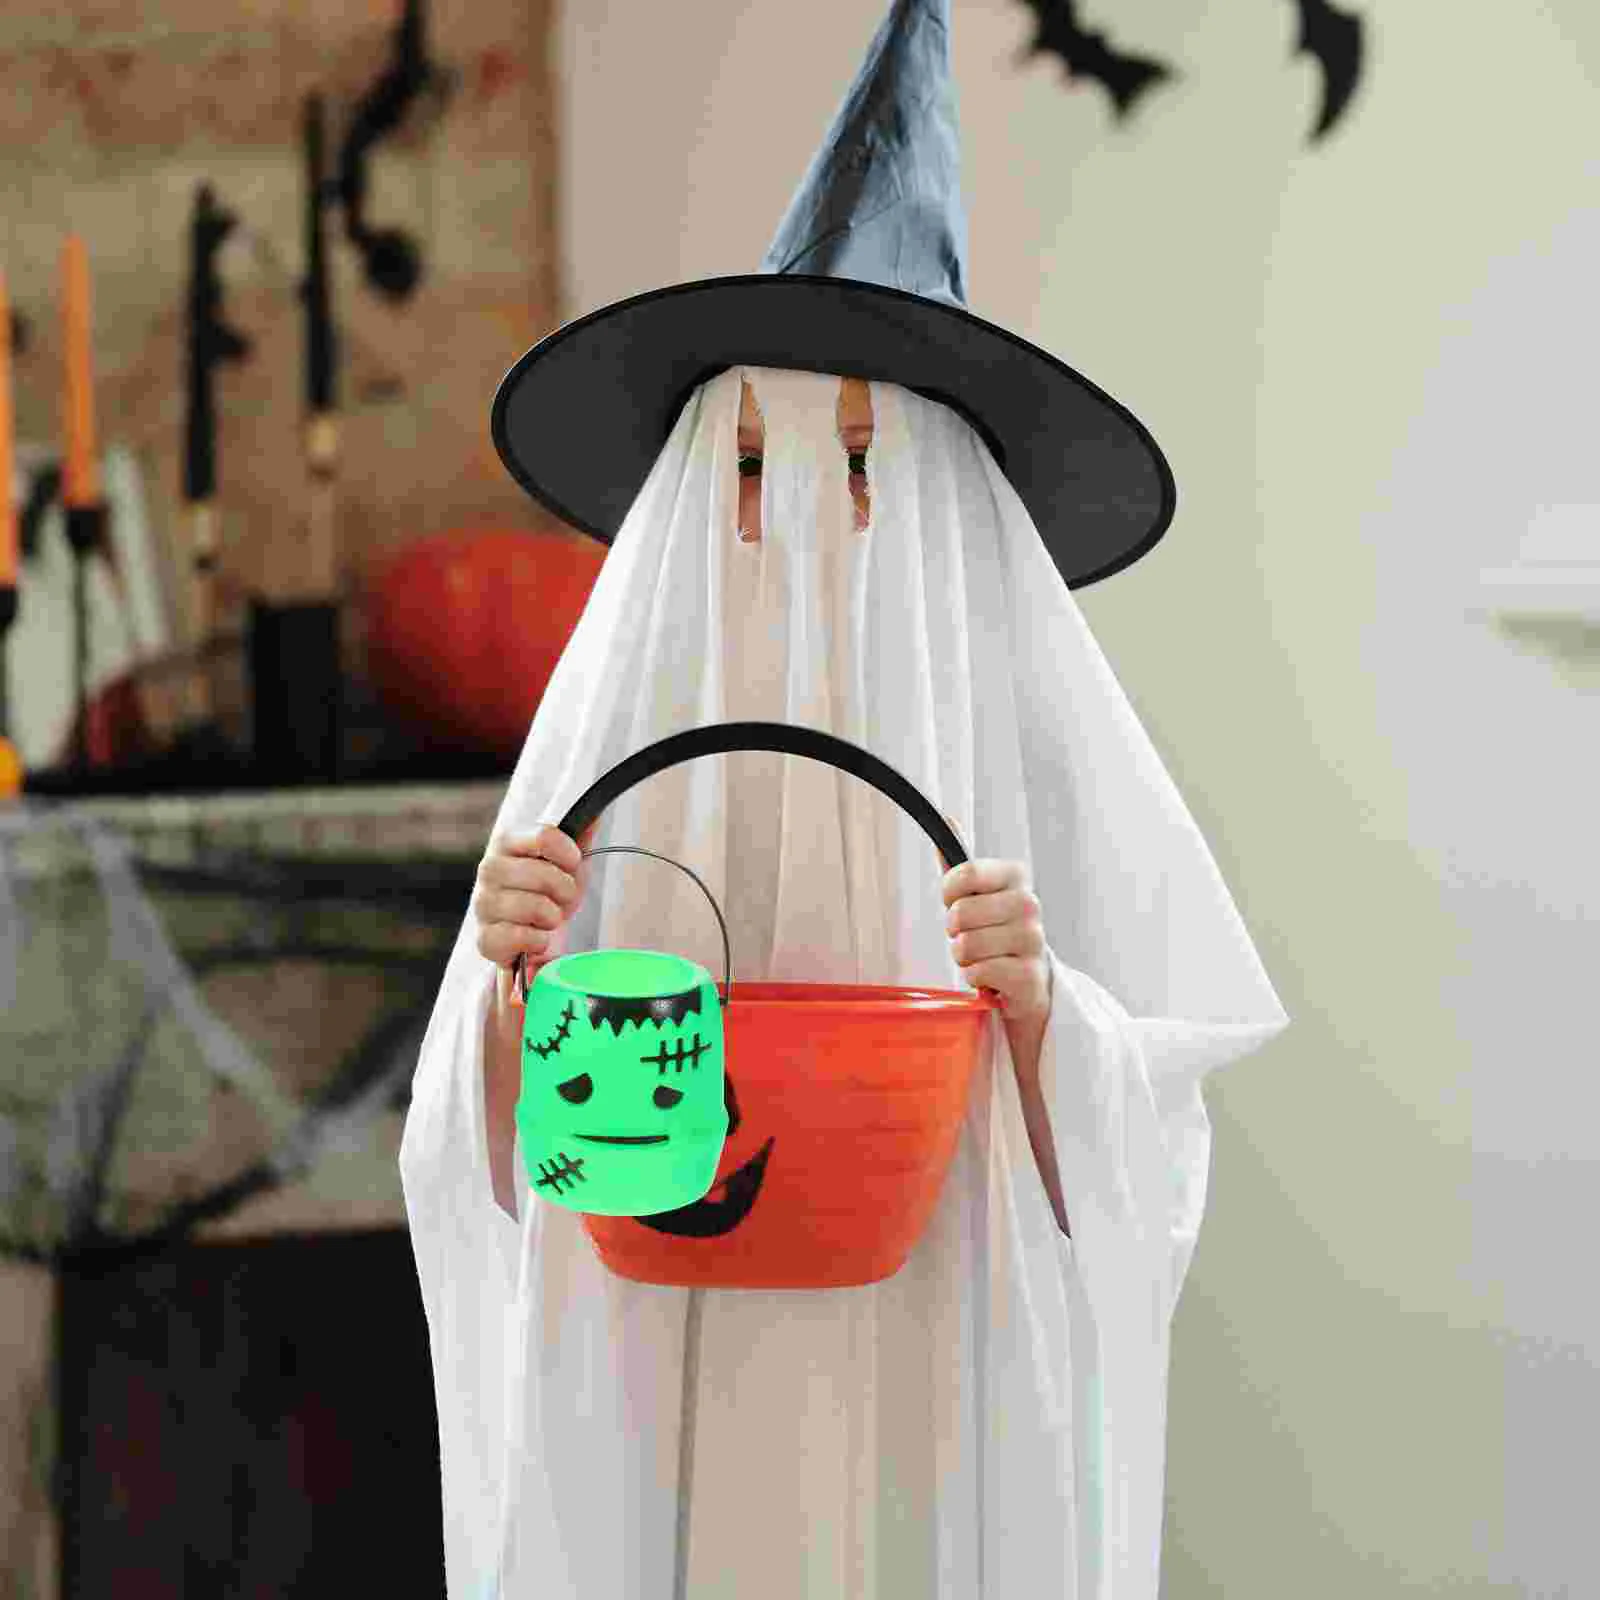 

3 Pcs Candy Container Pumpkin Design Holder Party Snack Bucket Halloween Props Portable Decor Plastic Child Kids Buckets